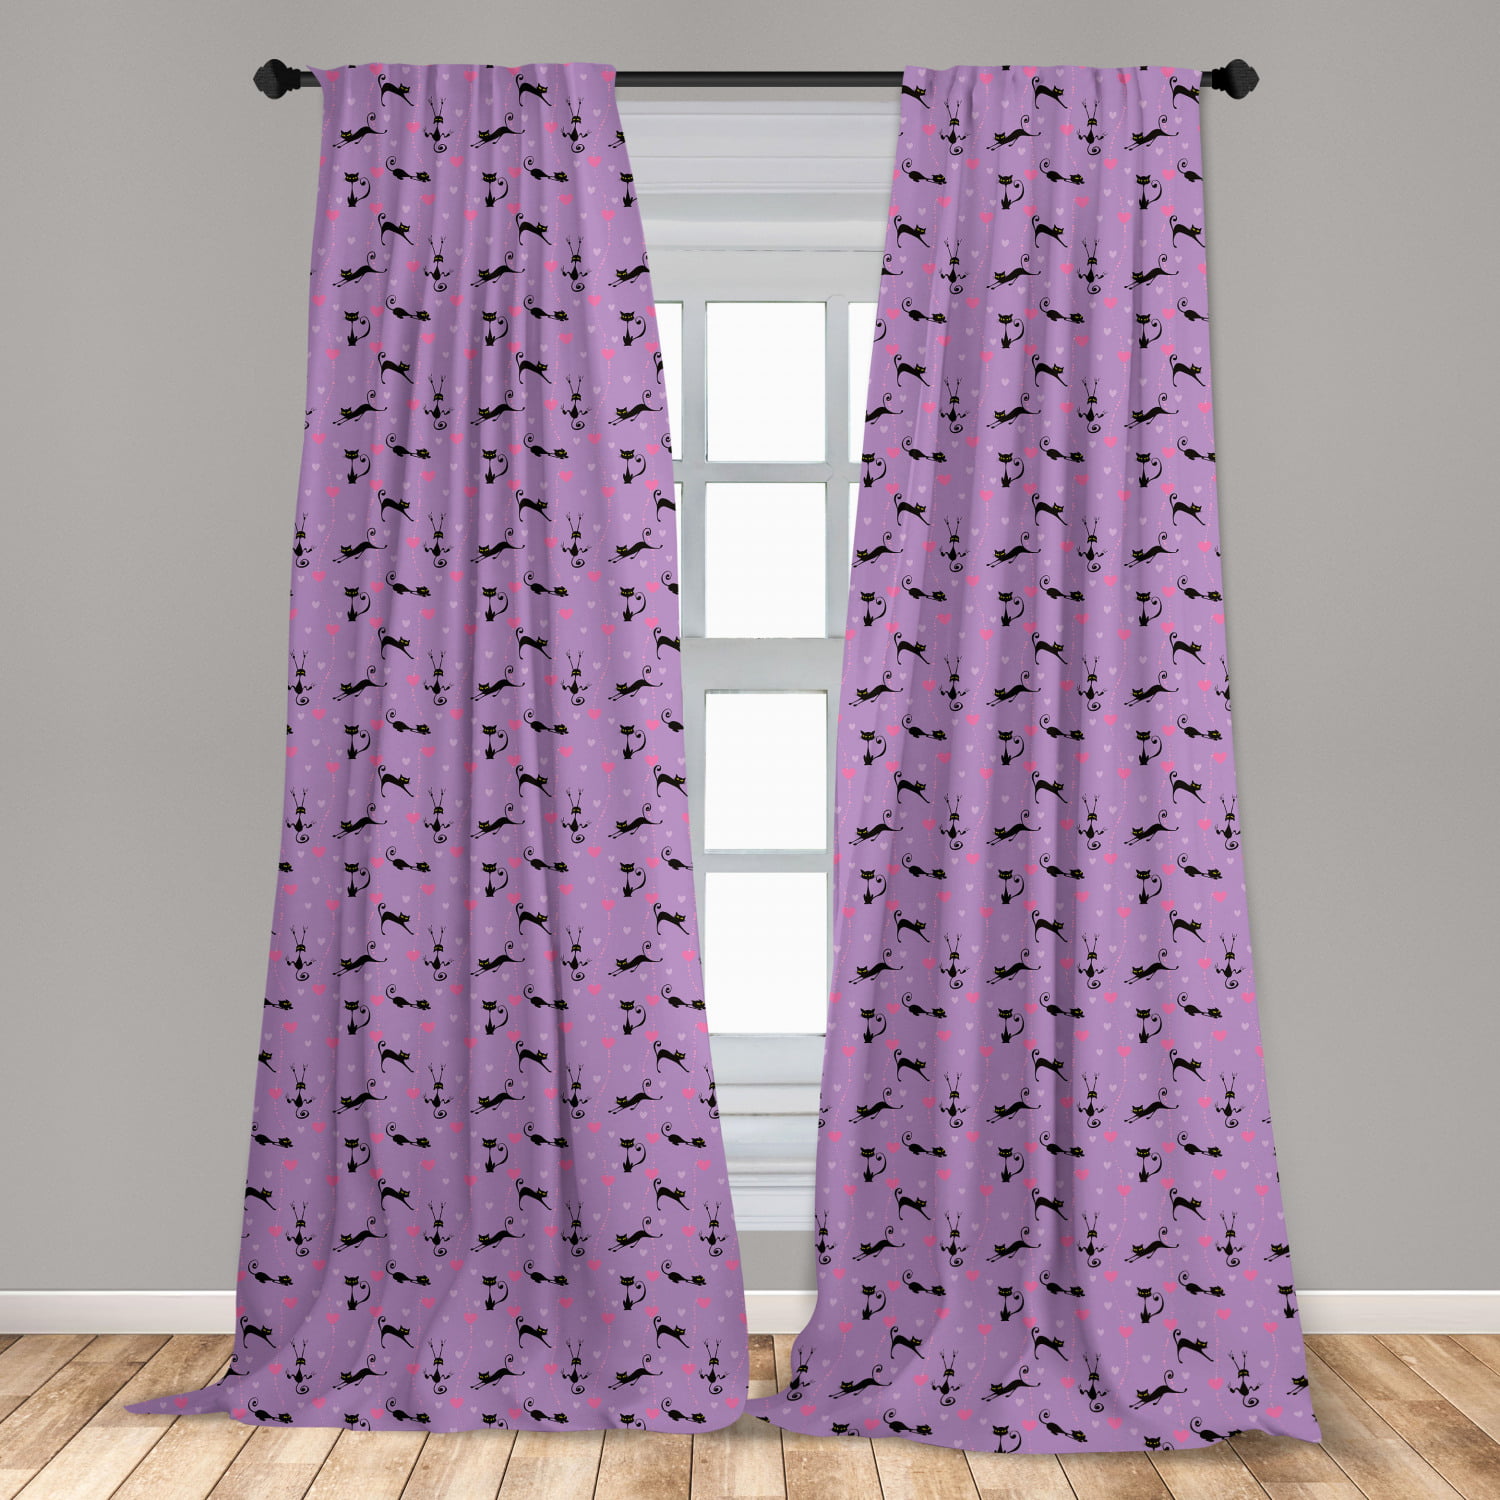 Window Ds For Living Room Bedroom, Black And Purple Window Curtains